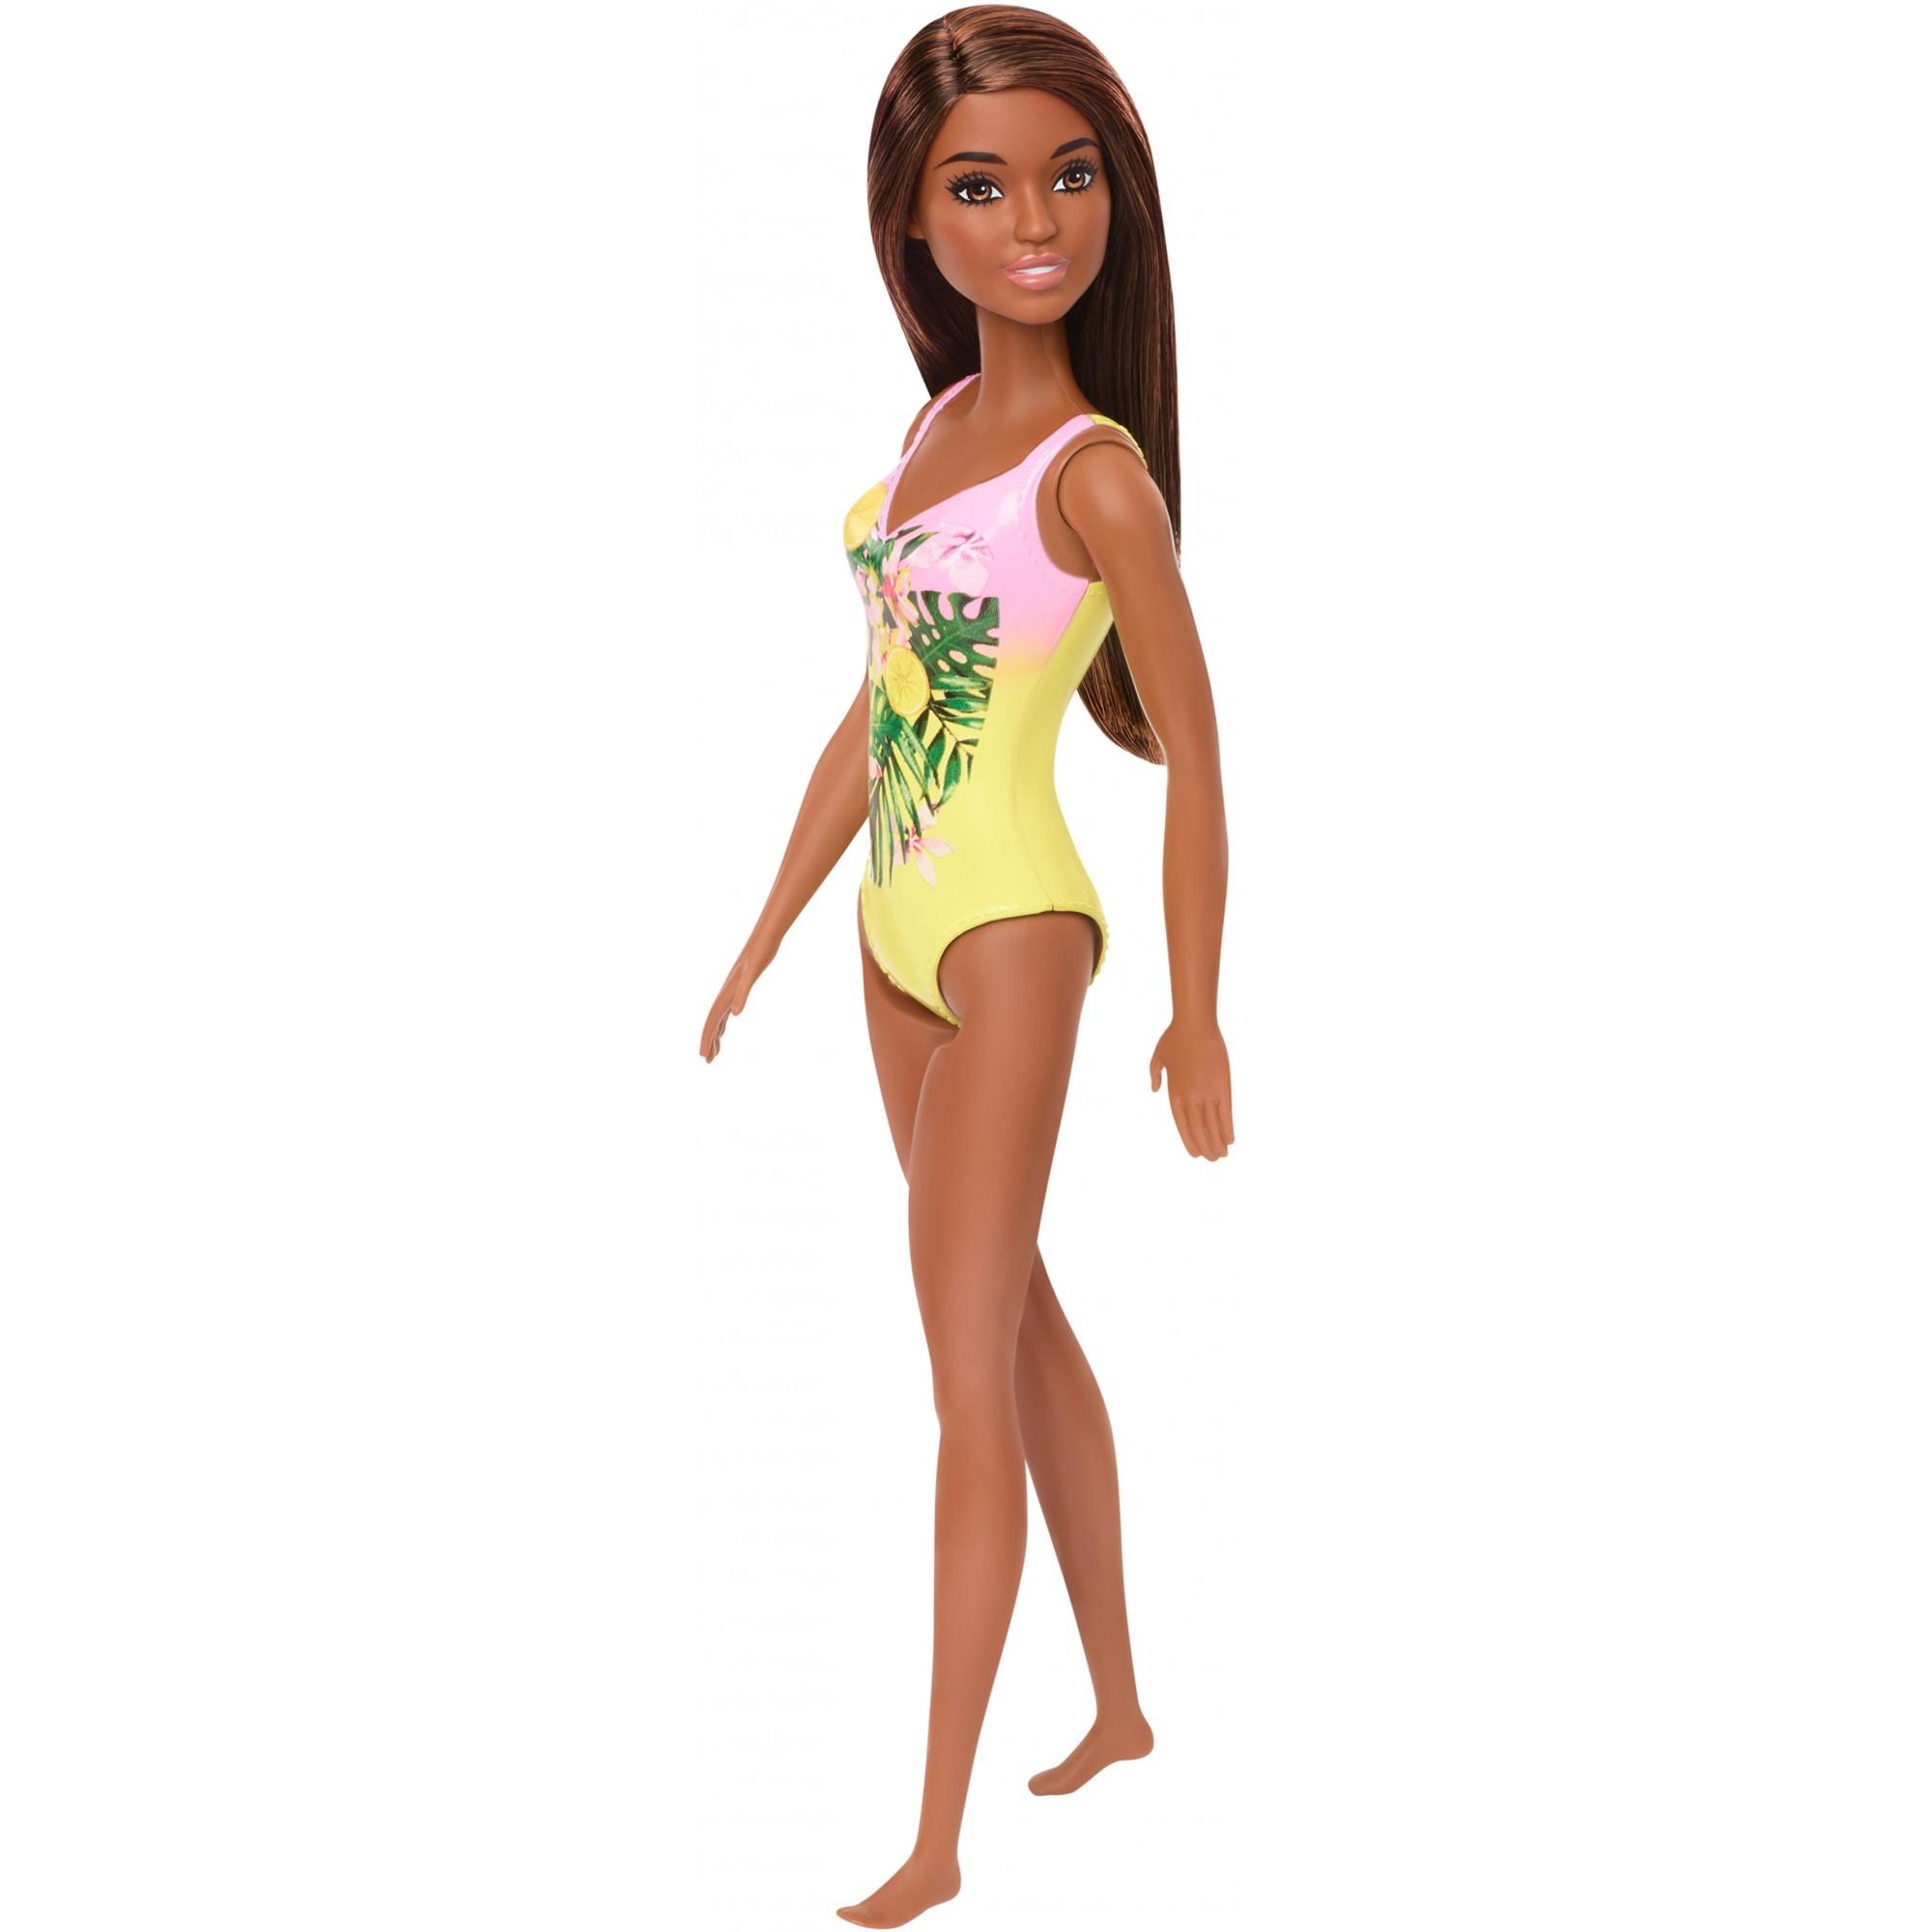 Barbie Swimsuit Beach Doll with Brown Hair & Tropical Floral Print Suit - image 4 of 6